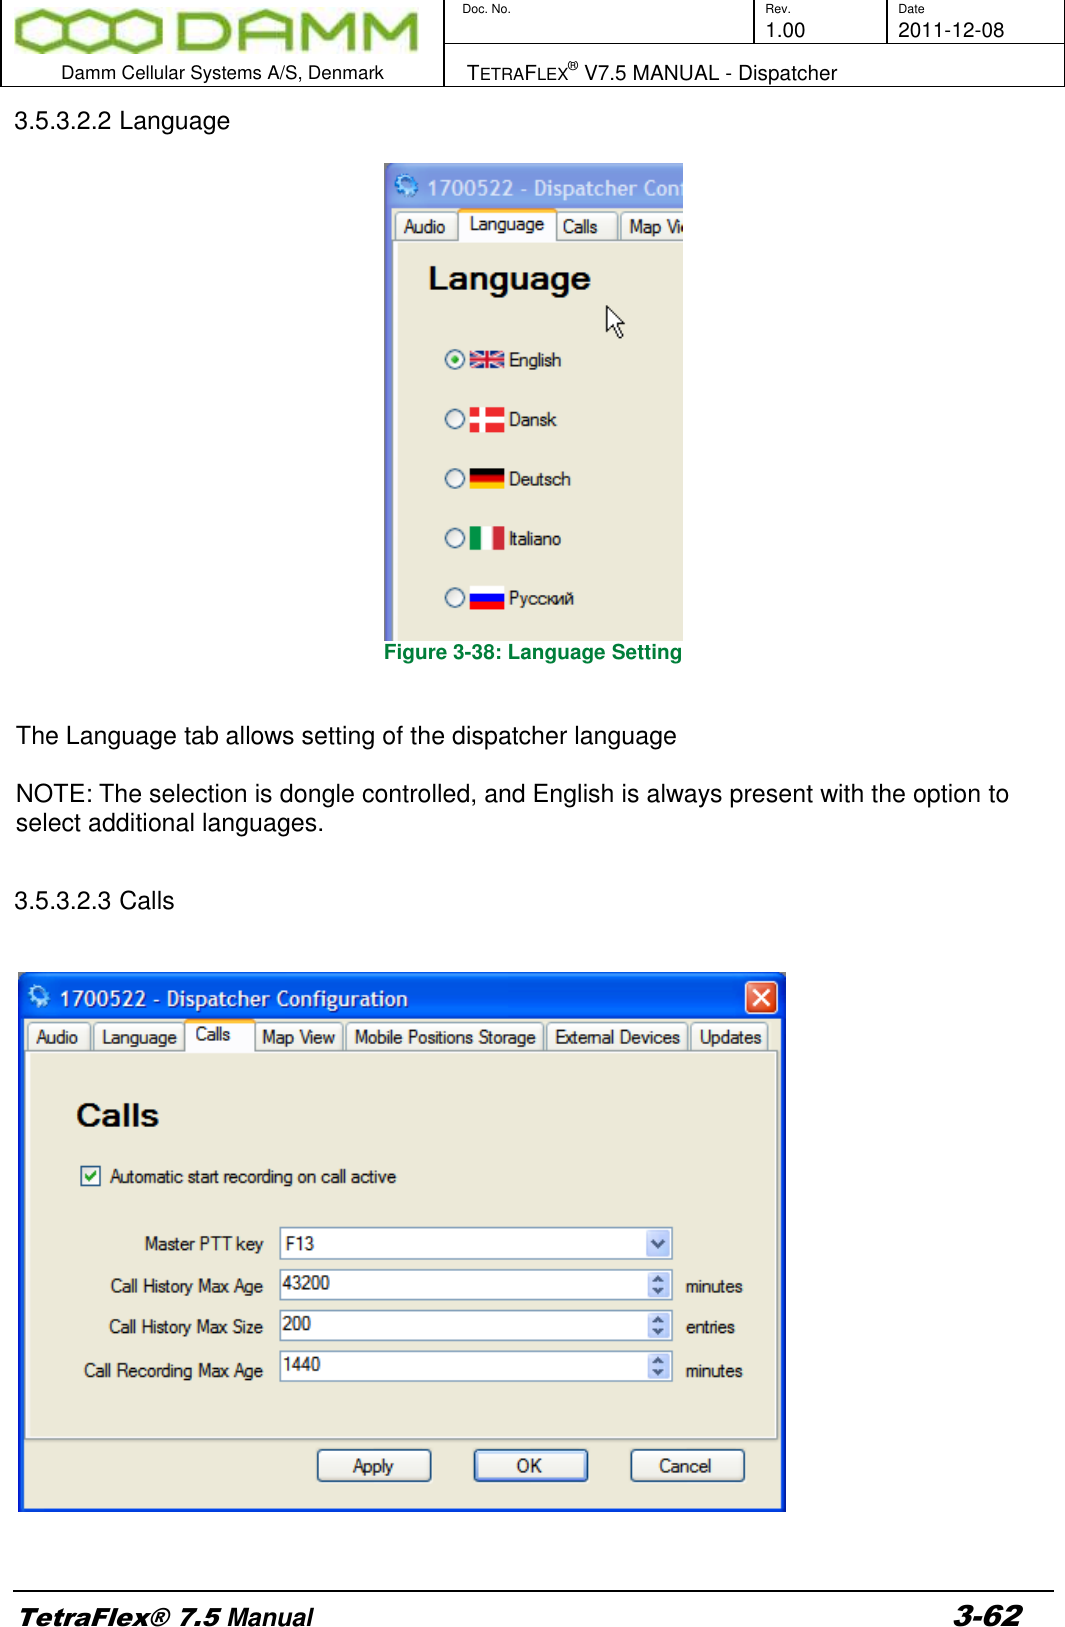        Doc. No. Rev. Date     1.00 2011-12-08  Damm Cellular Systems A/S, Denmark   TETRAFLEX® V7.5 MANUAL - Dispatcher  TetraFlex® 7.5 Manual 3-62 3.5.3.2.2 Language   Figure 3-38: Language Setting   The Language tab allows setting of the dispatcher language  NOTE: The selection is dongle controlled, and English is always present with the option to select additional languages.  3.5.3.2.3 Calls     